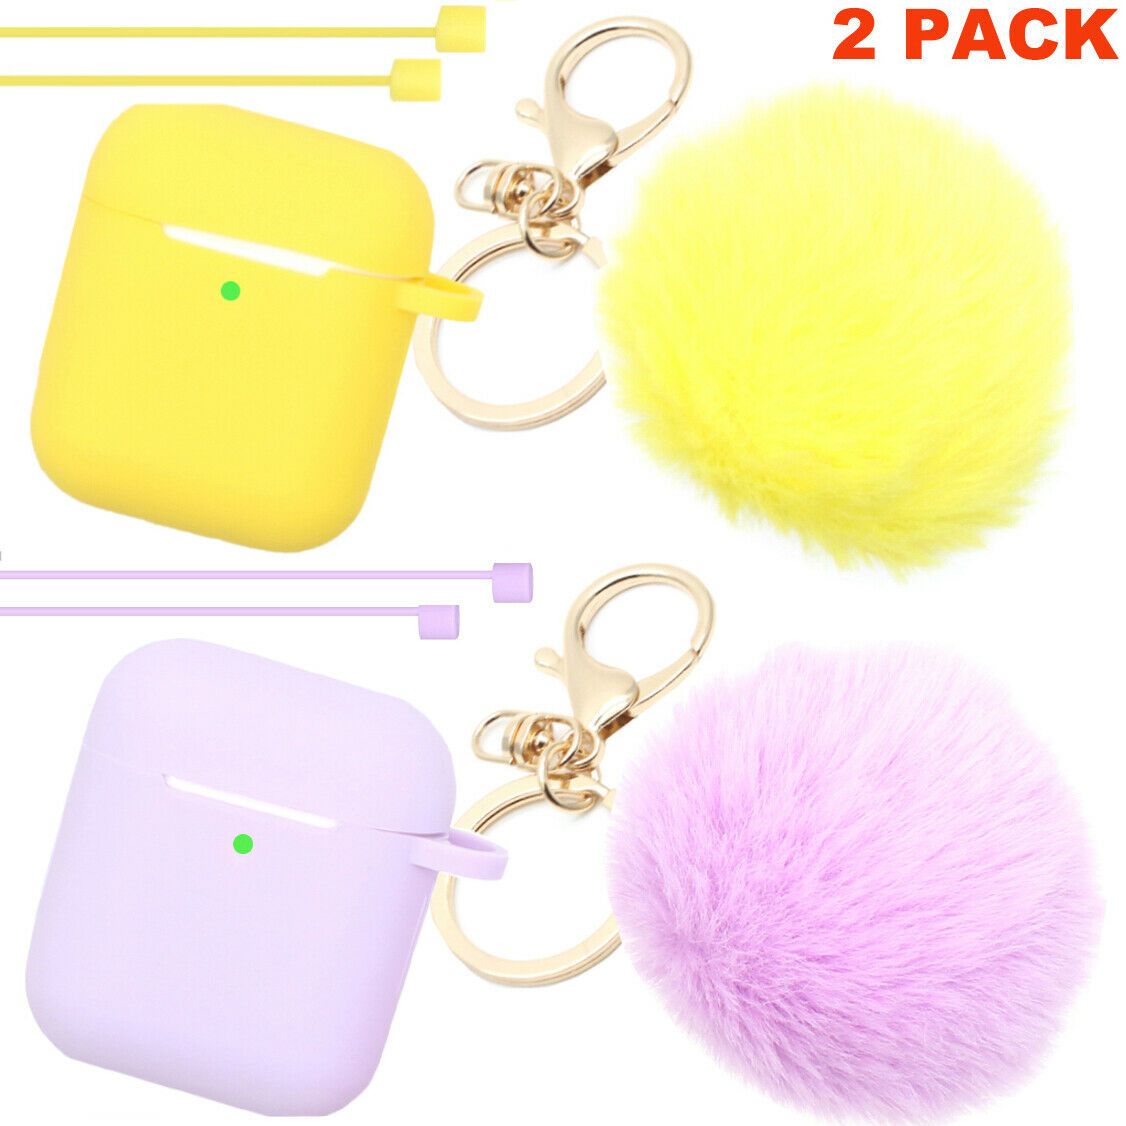 Cute Airpods Silicone Case Cover w/Fur Ball Keychain Strap for Apple Airpods 1/2 ervin.accessories Yellow+Purple (2 Pack) 